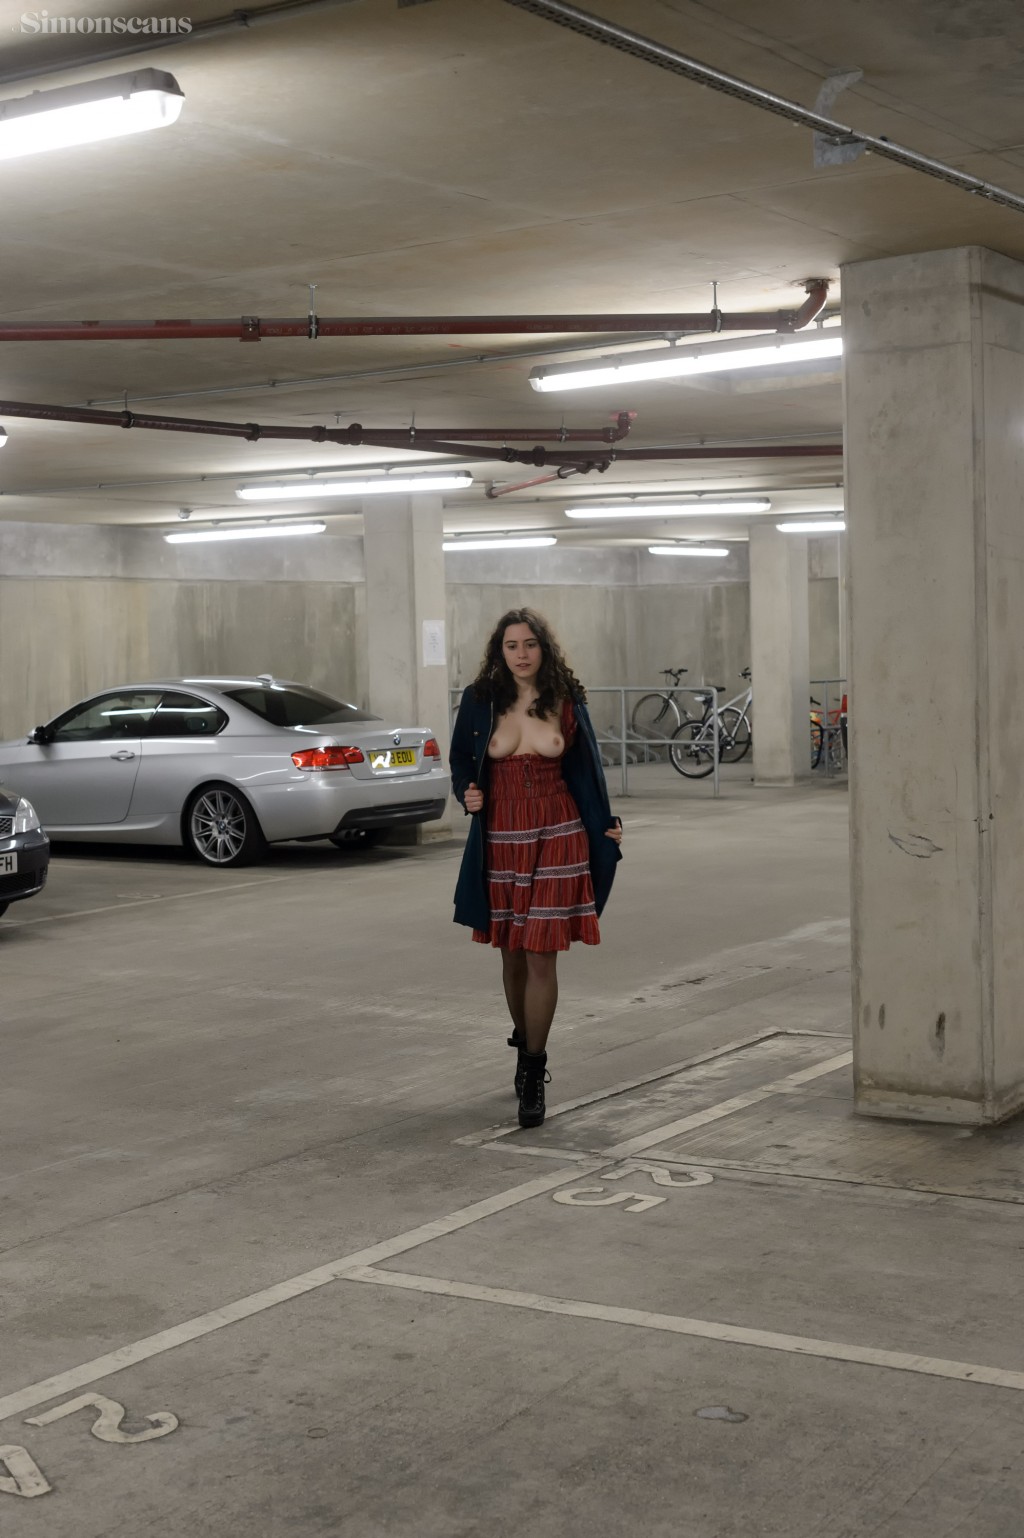 https://www.elitebabes.com/as-she-was-alone-in-the-garage-lia-walked-around-half-naked-50805/